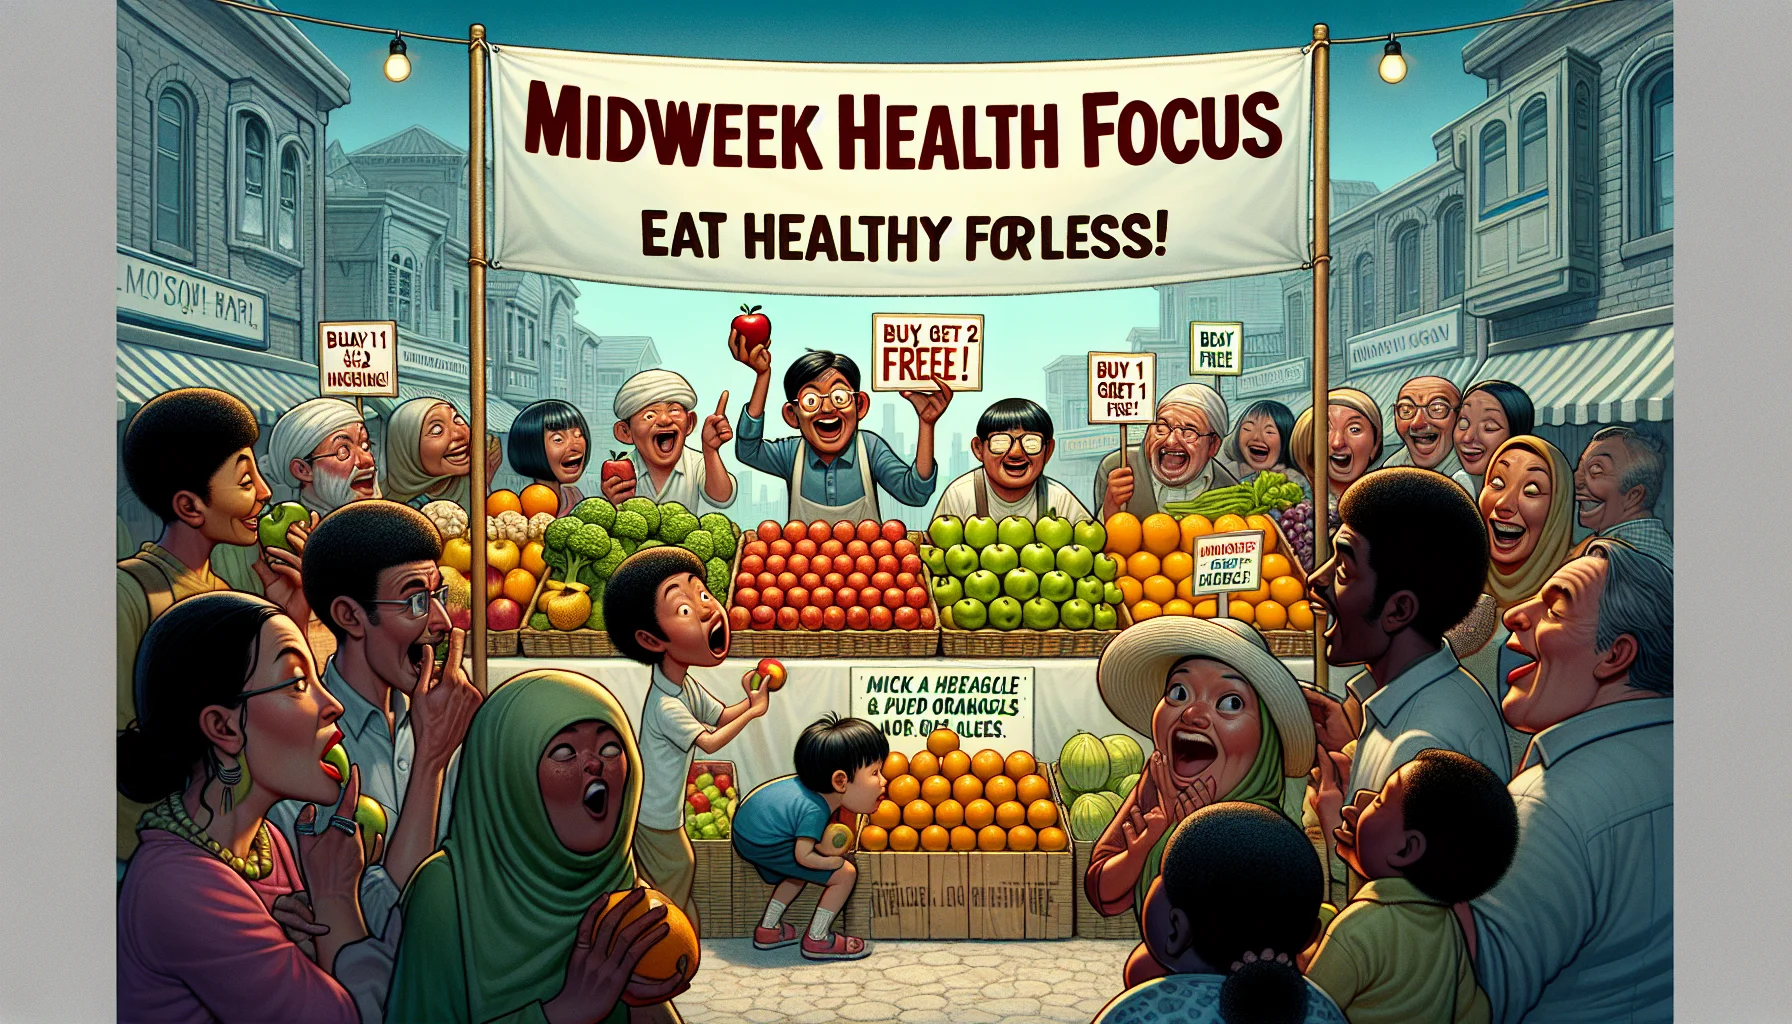 Visualize an amusing scenario that draws attention to the 'Midweek Health Focus'. Picture a crowded local market where various fruits and vegetables are being sold at surprisingly low prices. Above the market, a large banner reads 'Midweek Health Focus - Eat Healthy for Less!' The focus should be on a stand where an Asian man is selling apples and oranges with a sign saying 'Buy 1, Get 2 Free!'. A black woman with a surprised expression and a grocery bag filled with fresh produce is seen bargaining. A small kid of Hispanic descent is trying to reach an apple, while his Middle-Eastern father is laughing, enjoying this healthy madness.